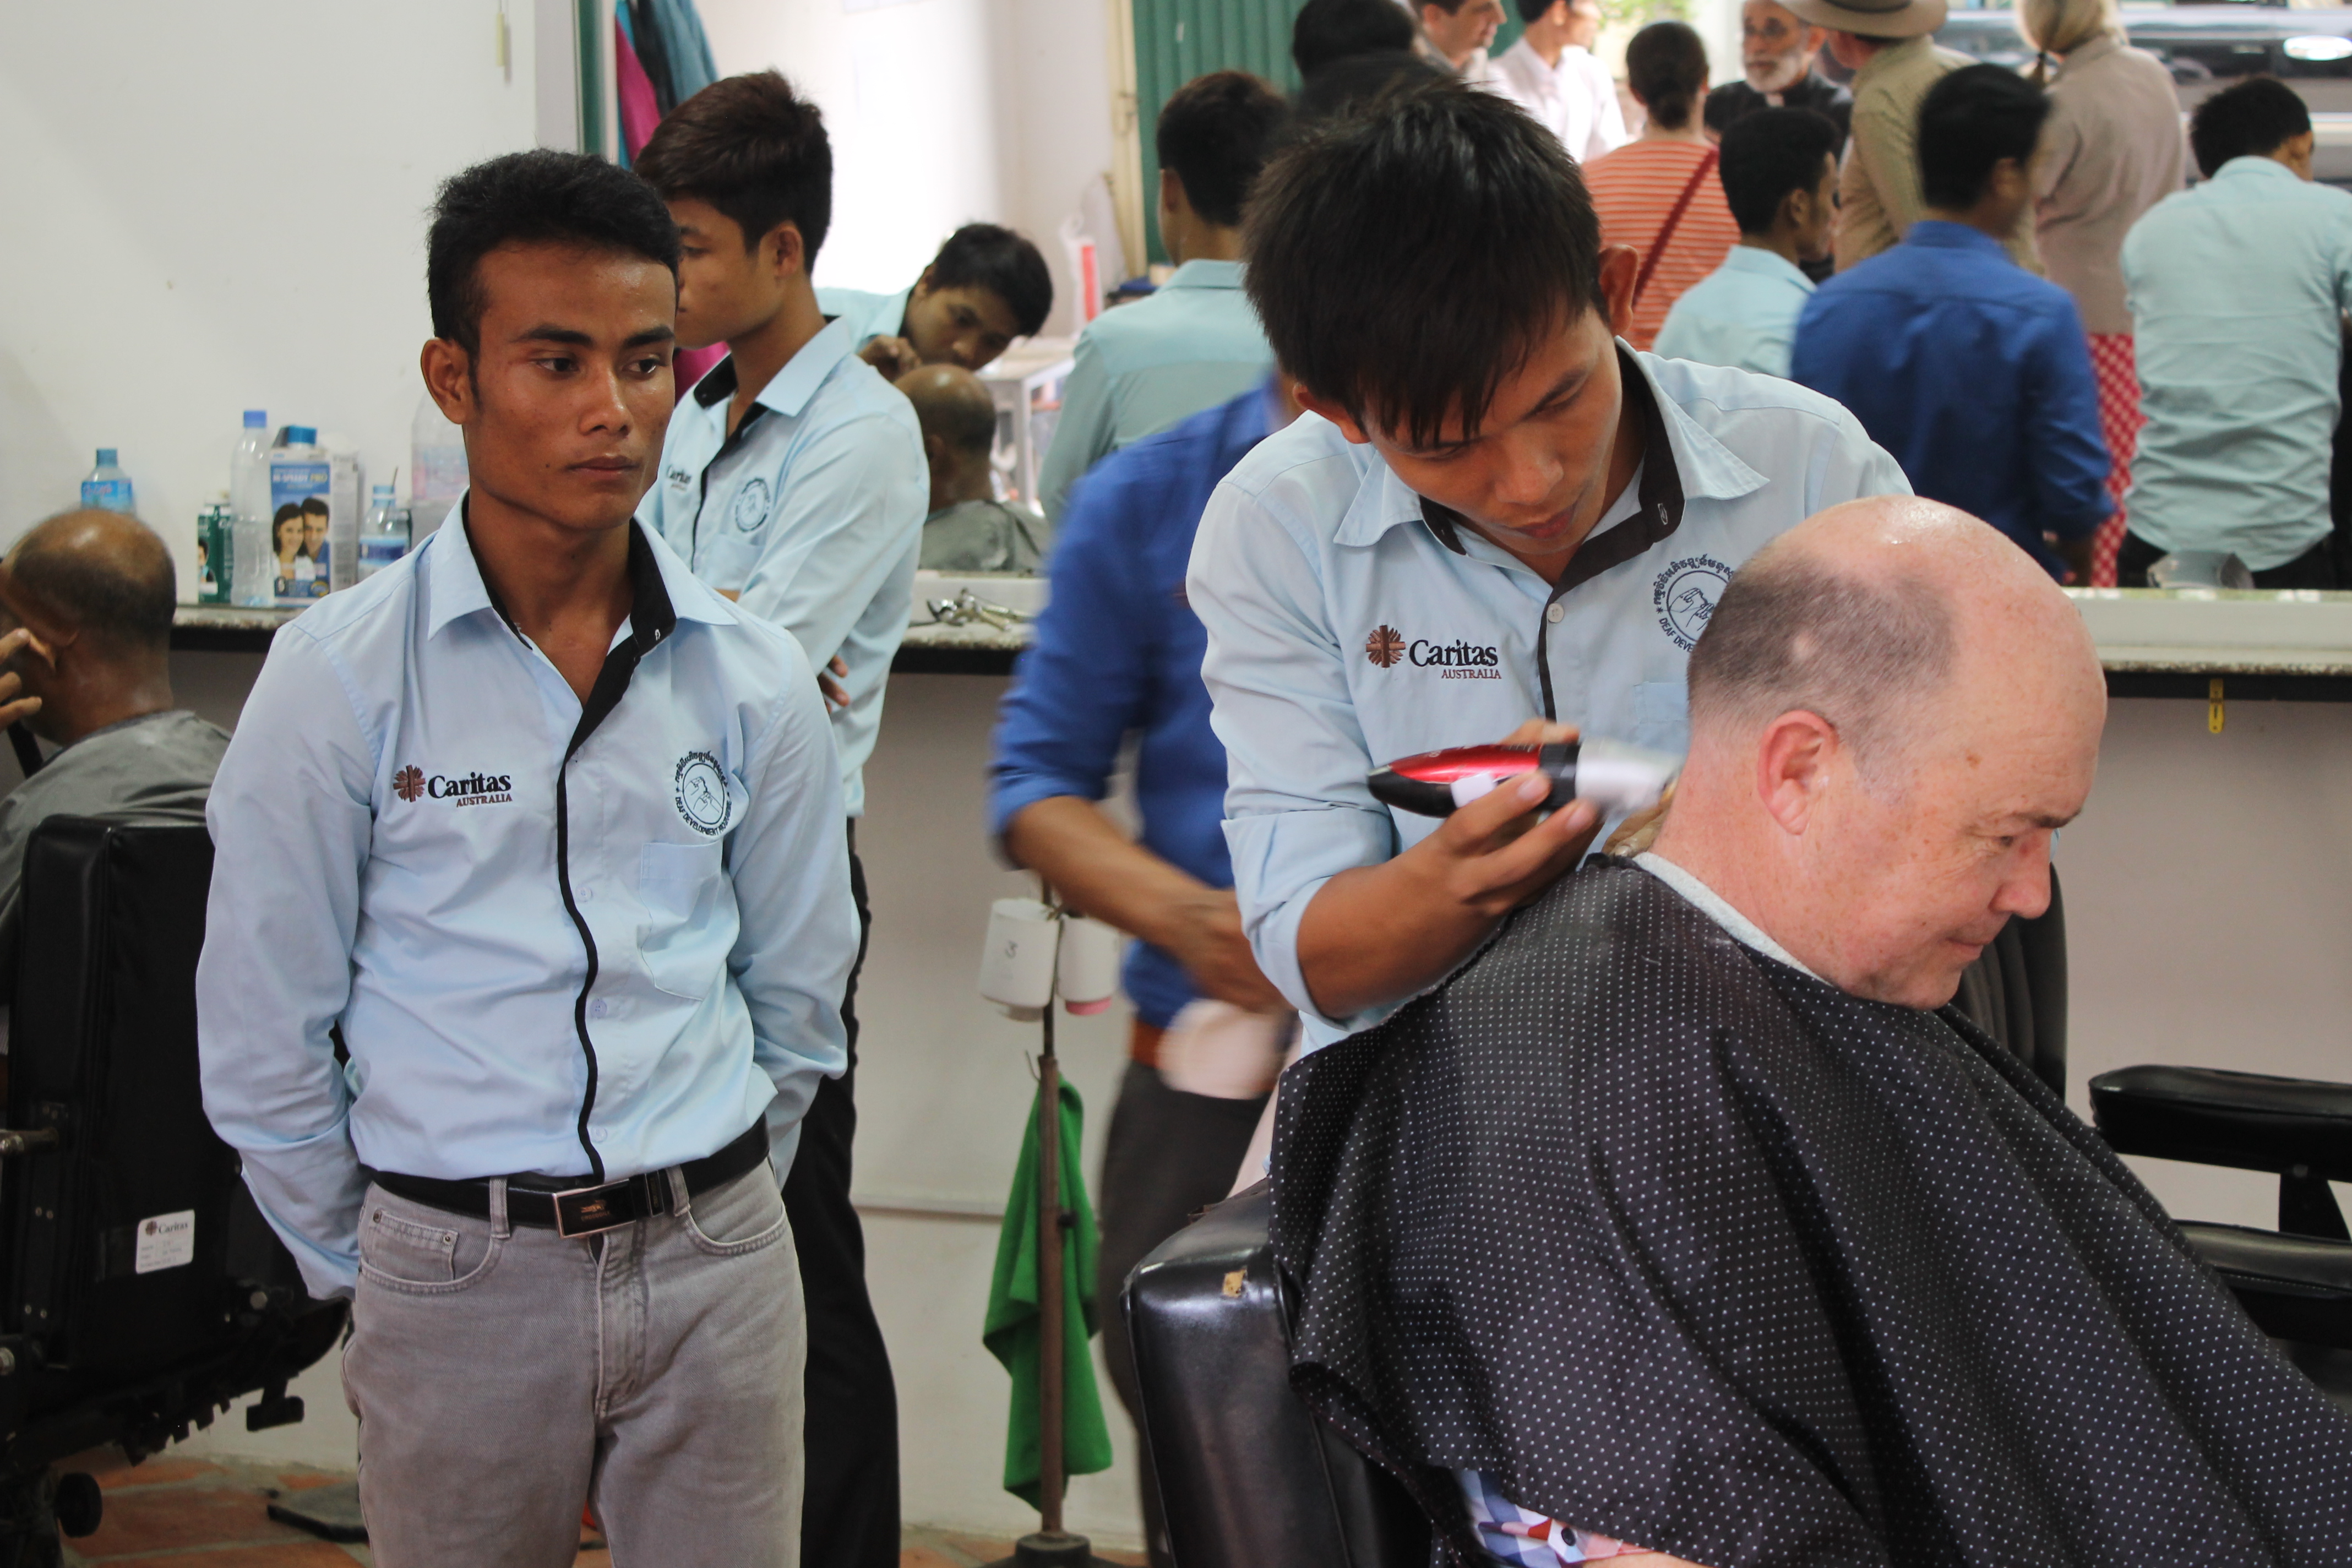 Chris getting his haircut by our up-and-coming barbers